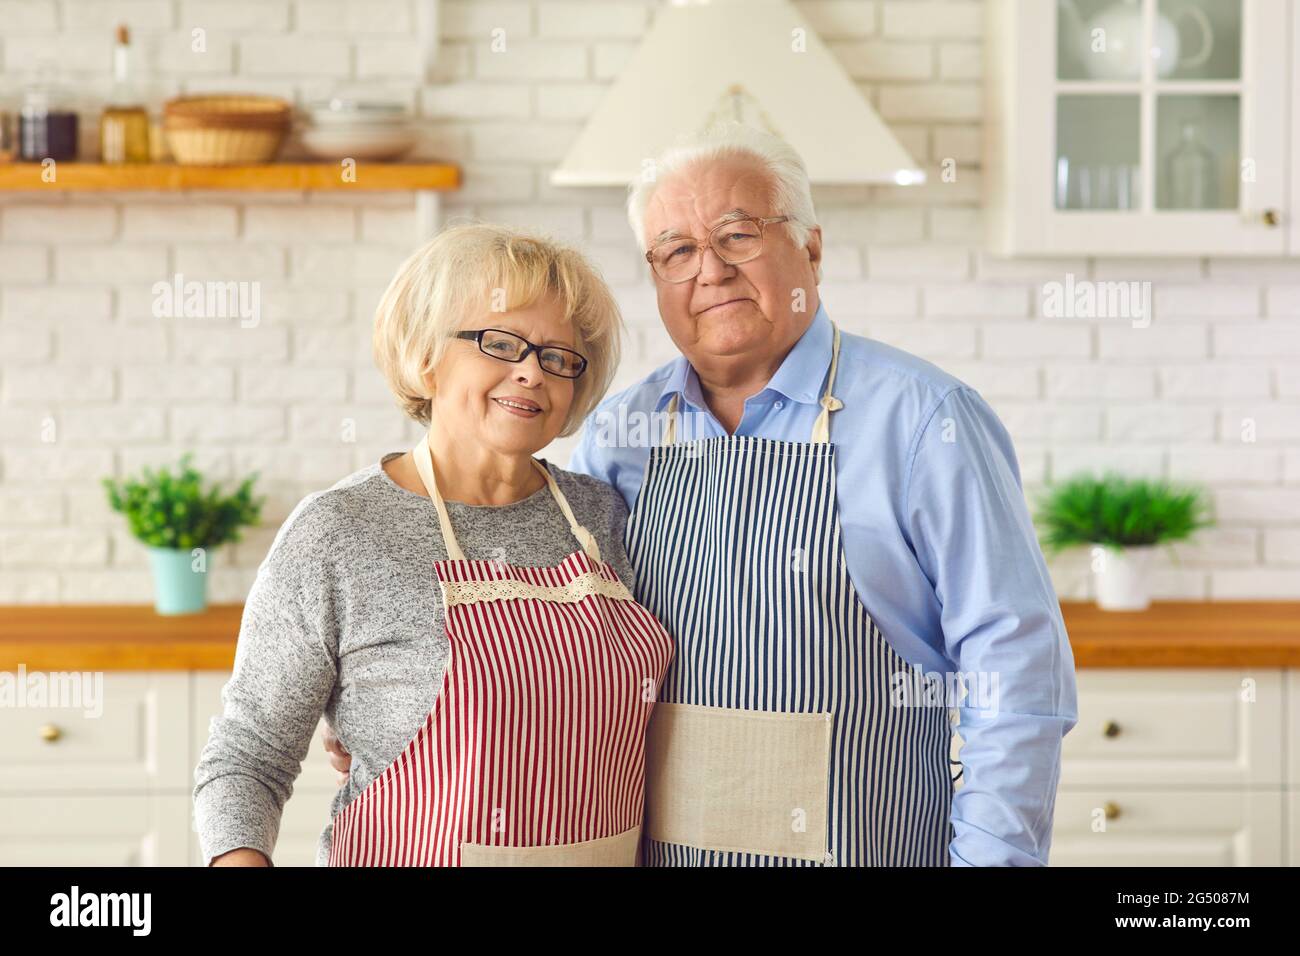 Portrait of a happy married senior couple dressed in aprons and posing in their kitchen. Stock Photo